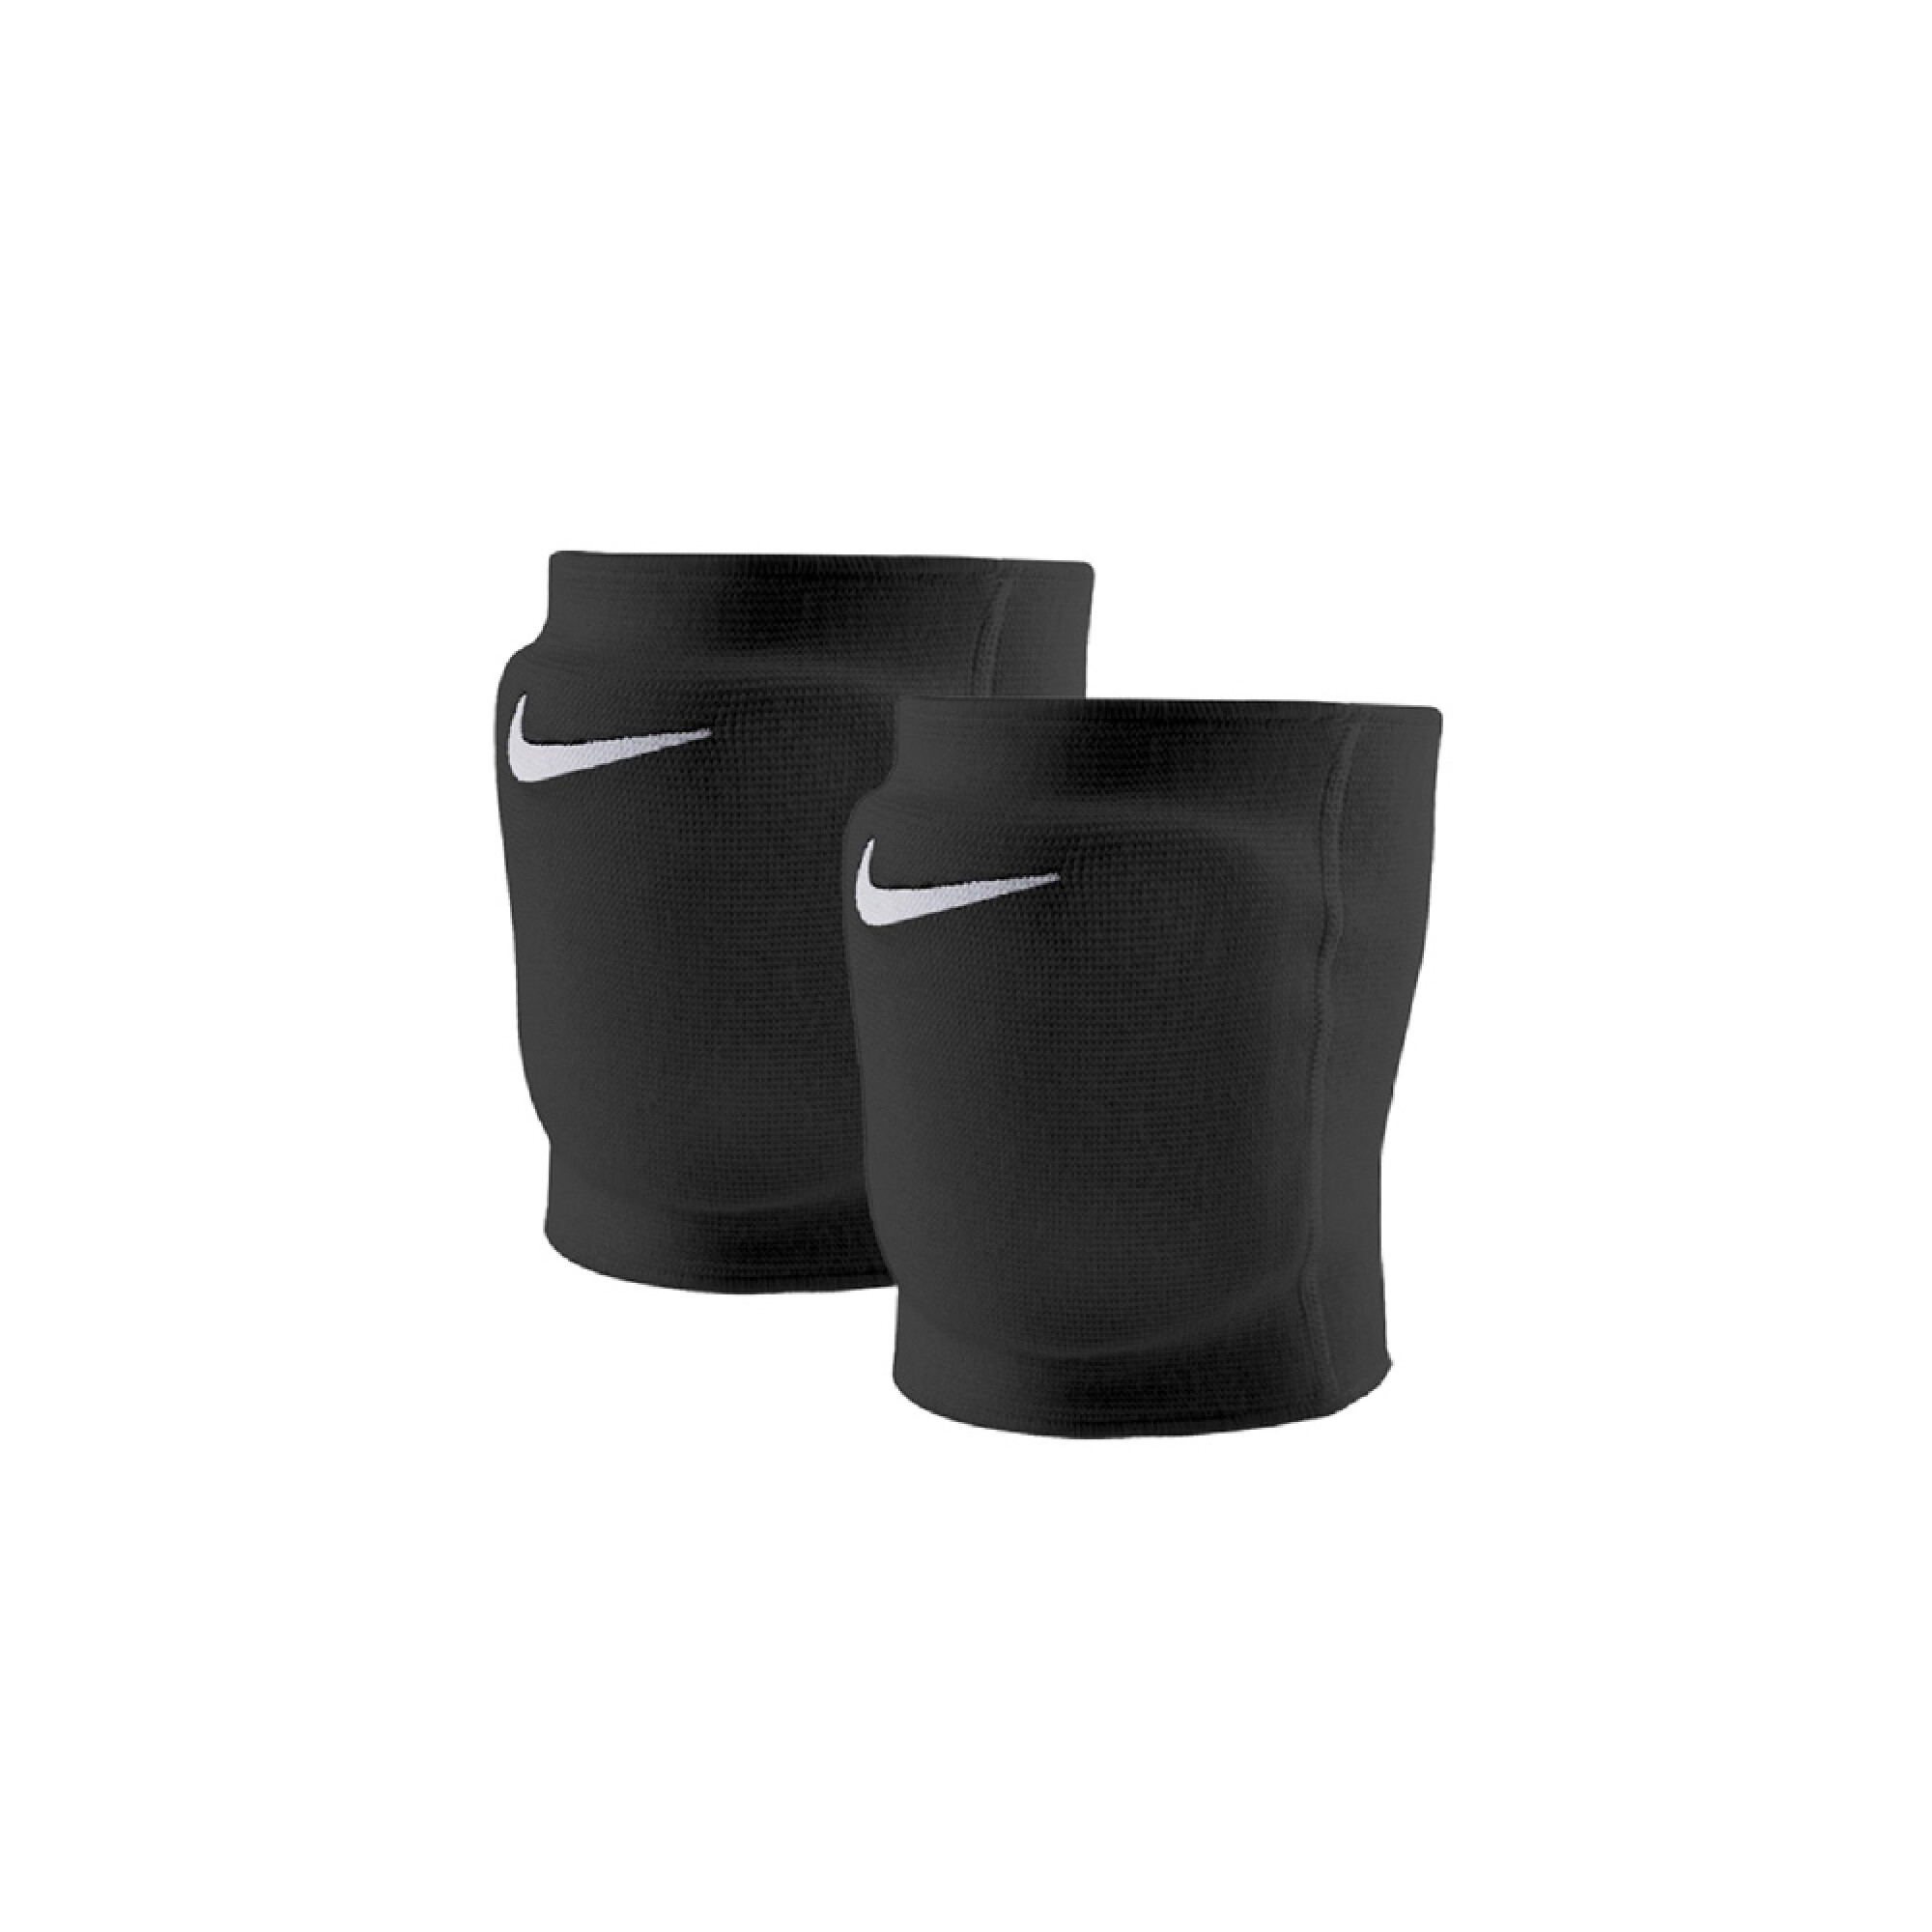 RODILLERAS NIKE ESSENTIAL VOLLEYBALL PADS - Global